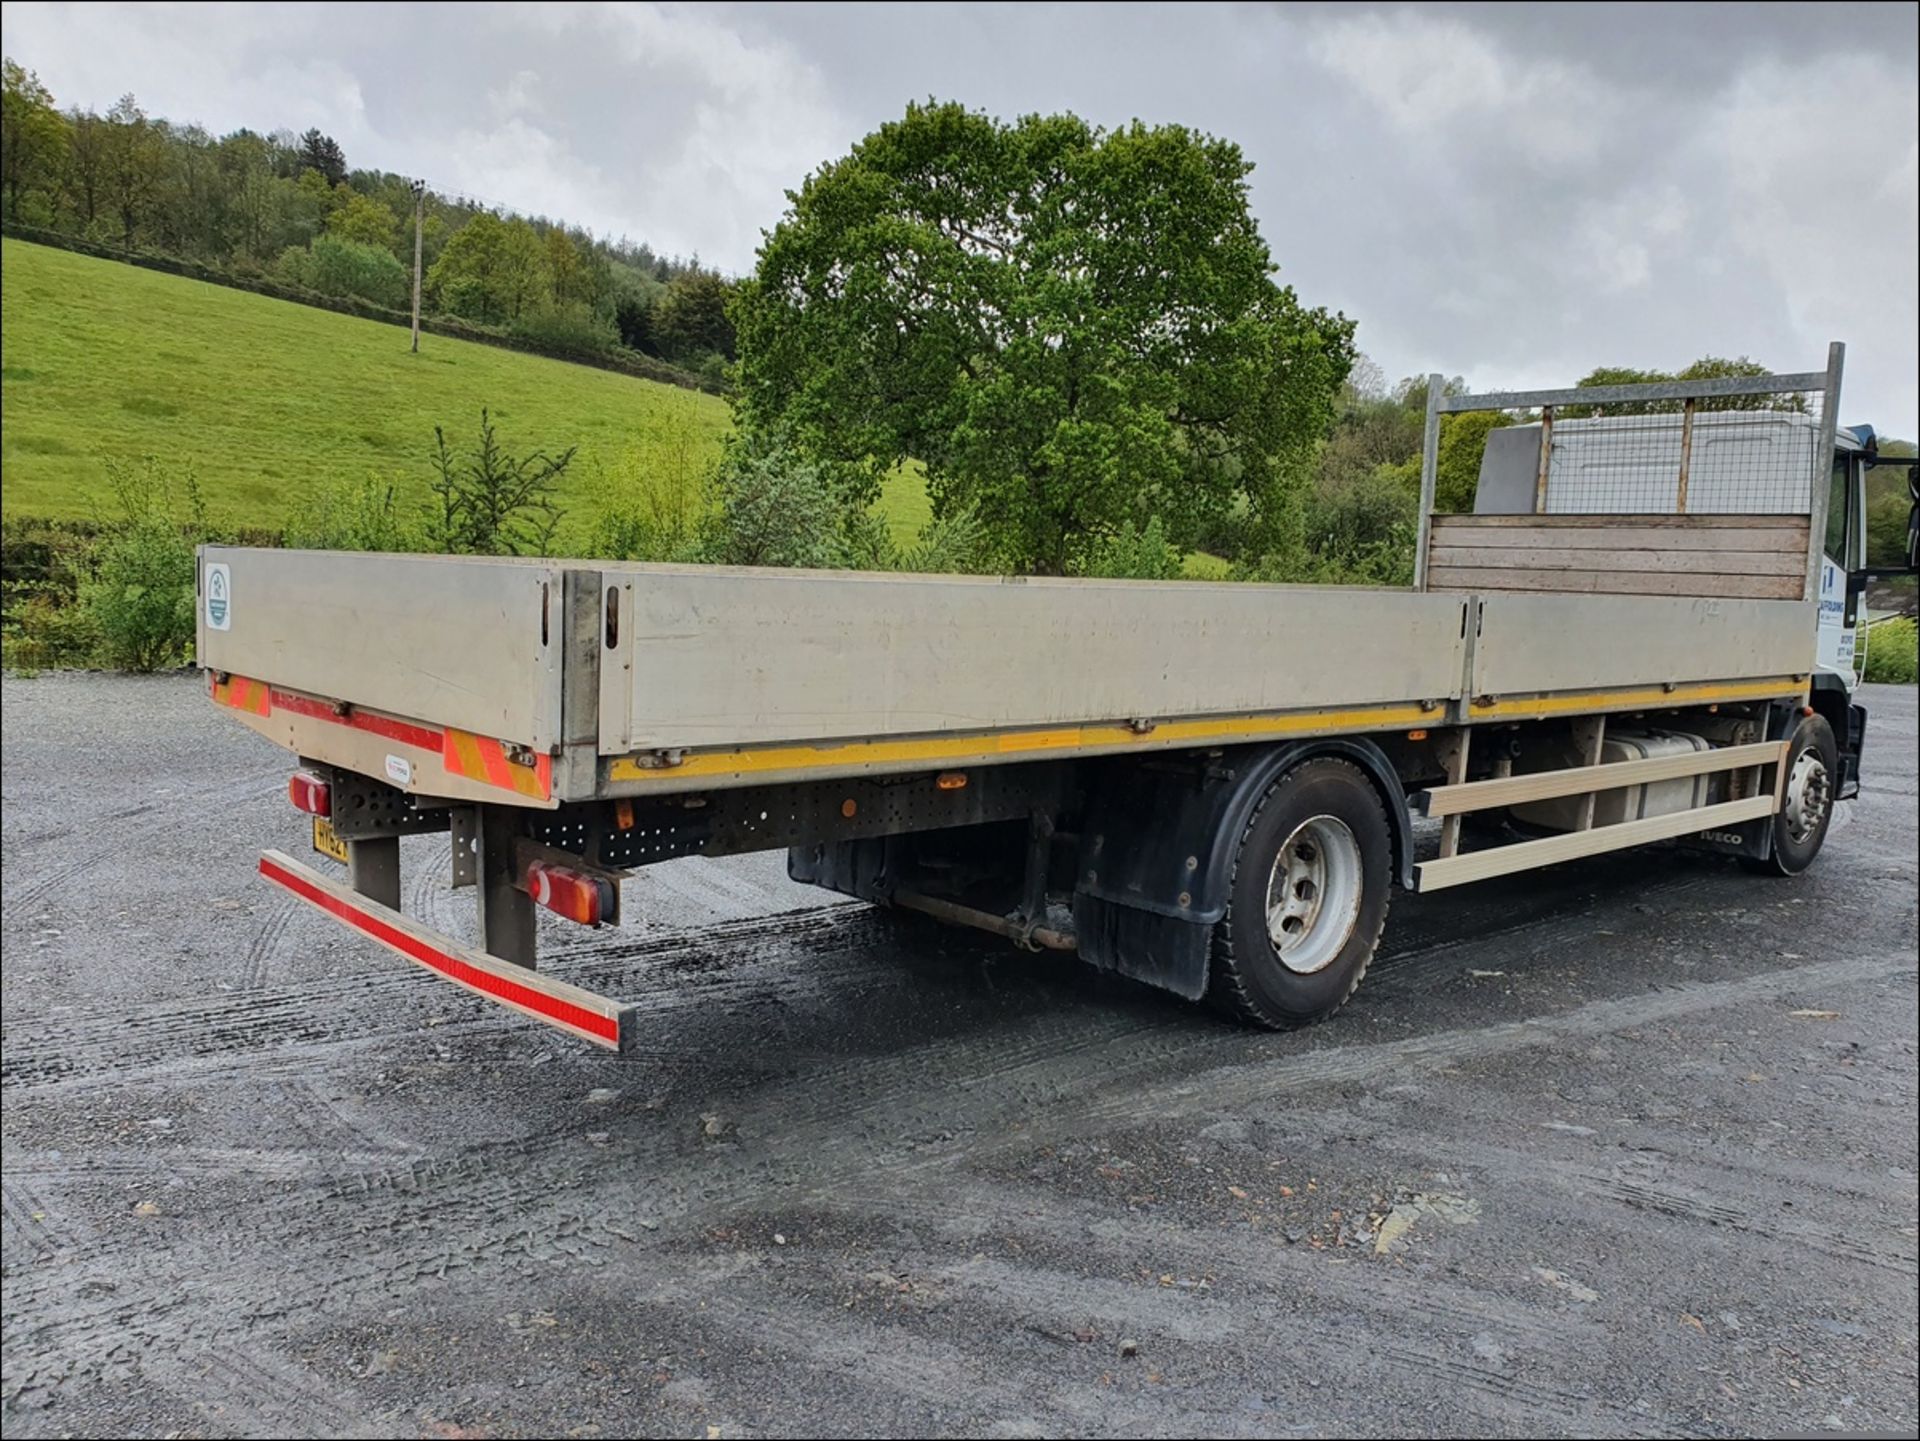 12/62 IVECO EUROCARGO (MY 2008) - 5880cc 2dr Flat Bed (White, 148k) - Image 6 of 16